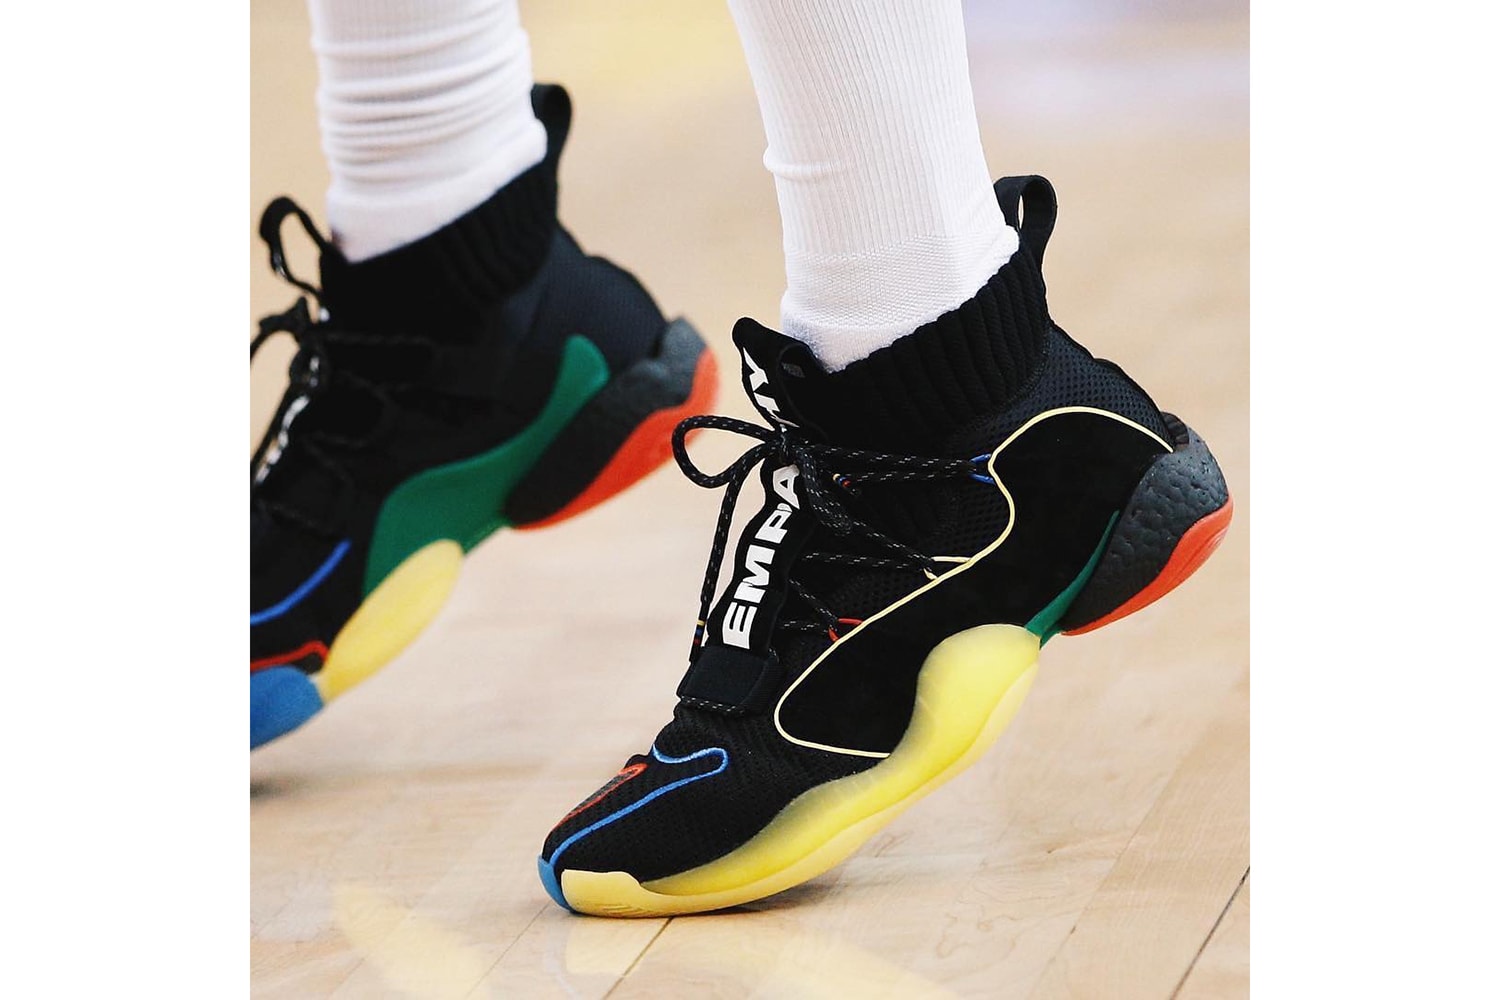 Nick Young adidas Crazy BYW X pharrell williams nba game 6 western conference finals playoffs